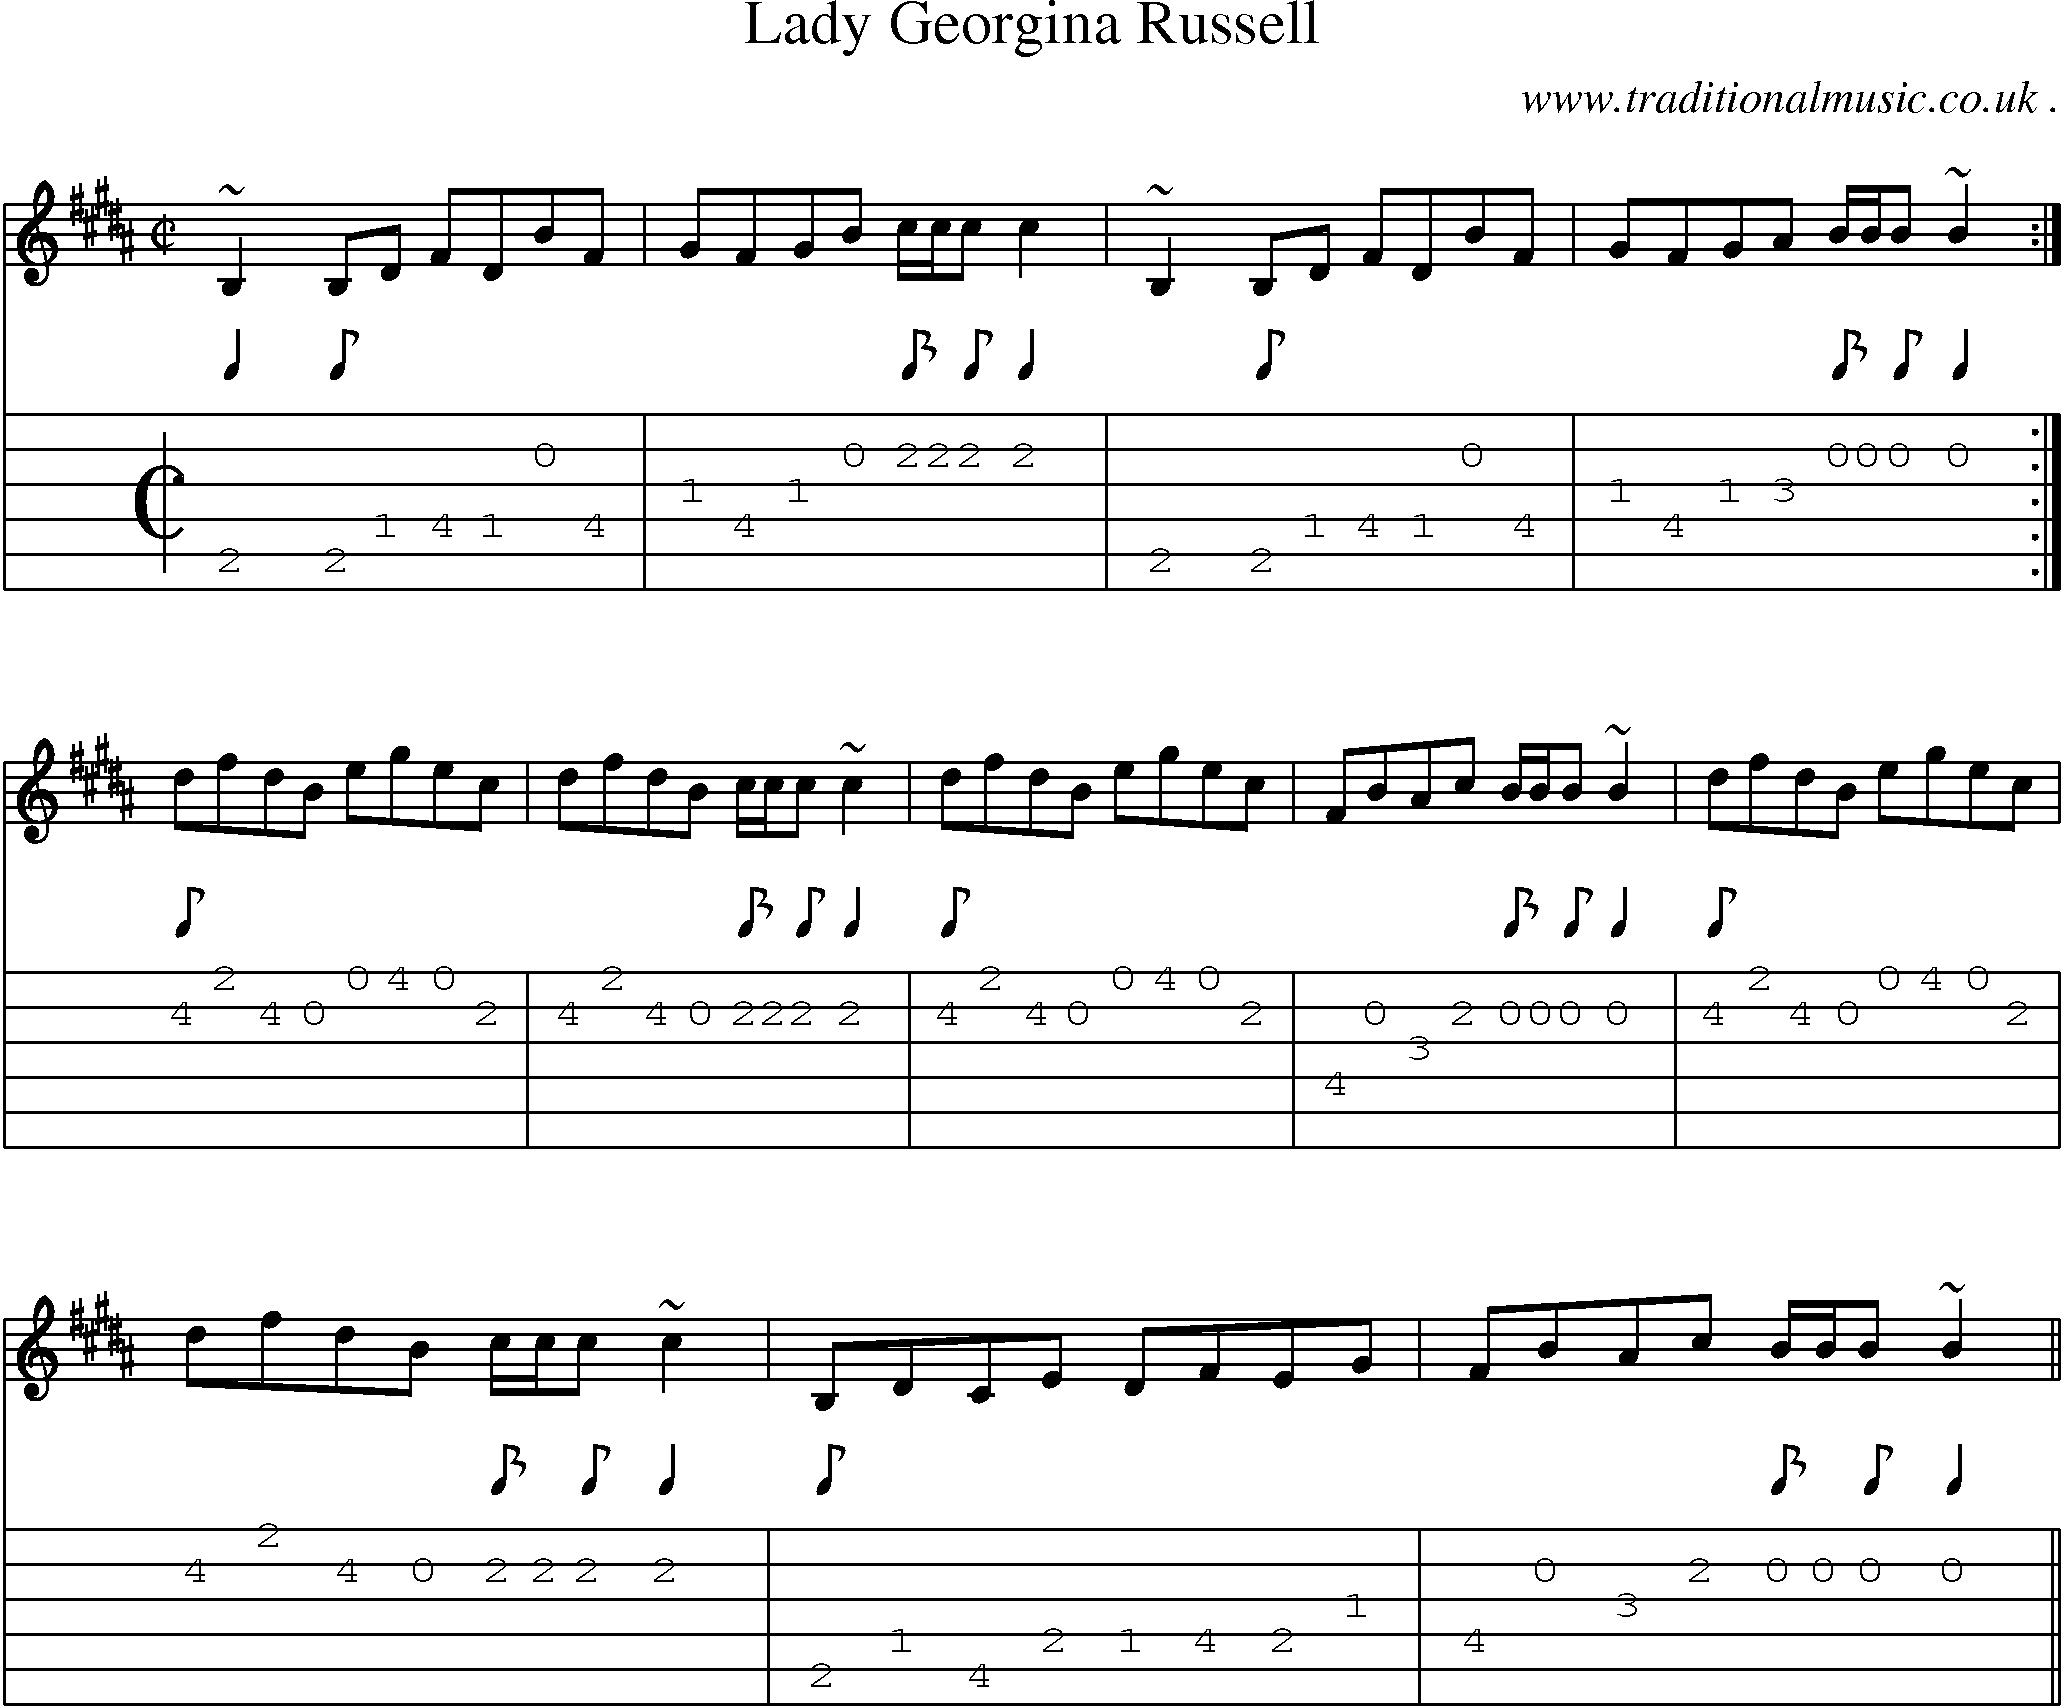 Sheet-music  score, Chords and Guitar Tabs for Lady Georgina Russell